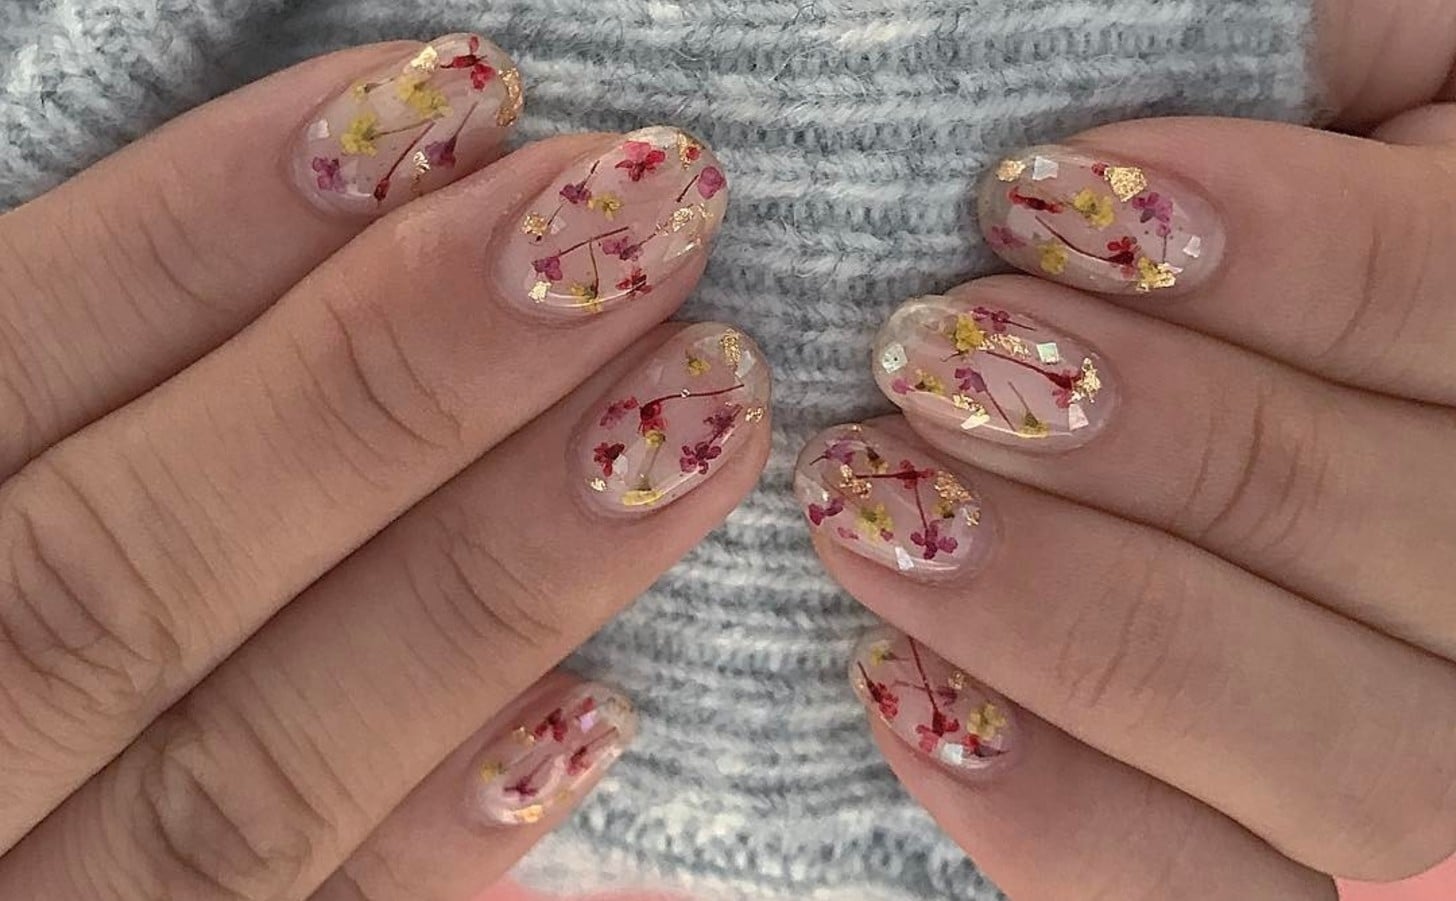 Cherry Blossom nails i did earlier in the month but never got